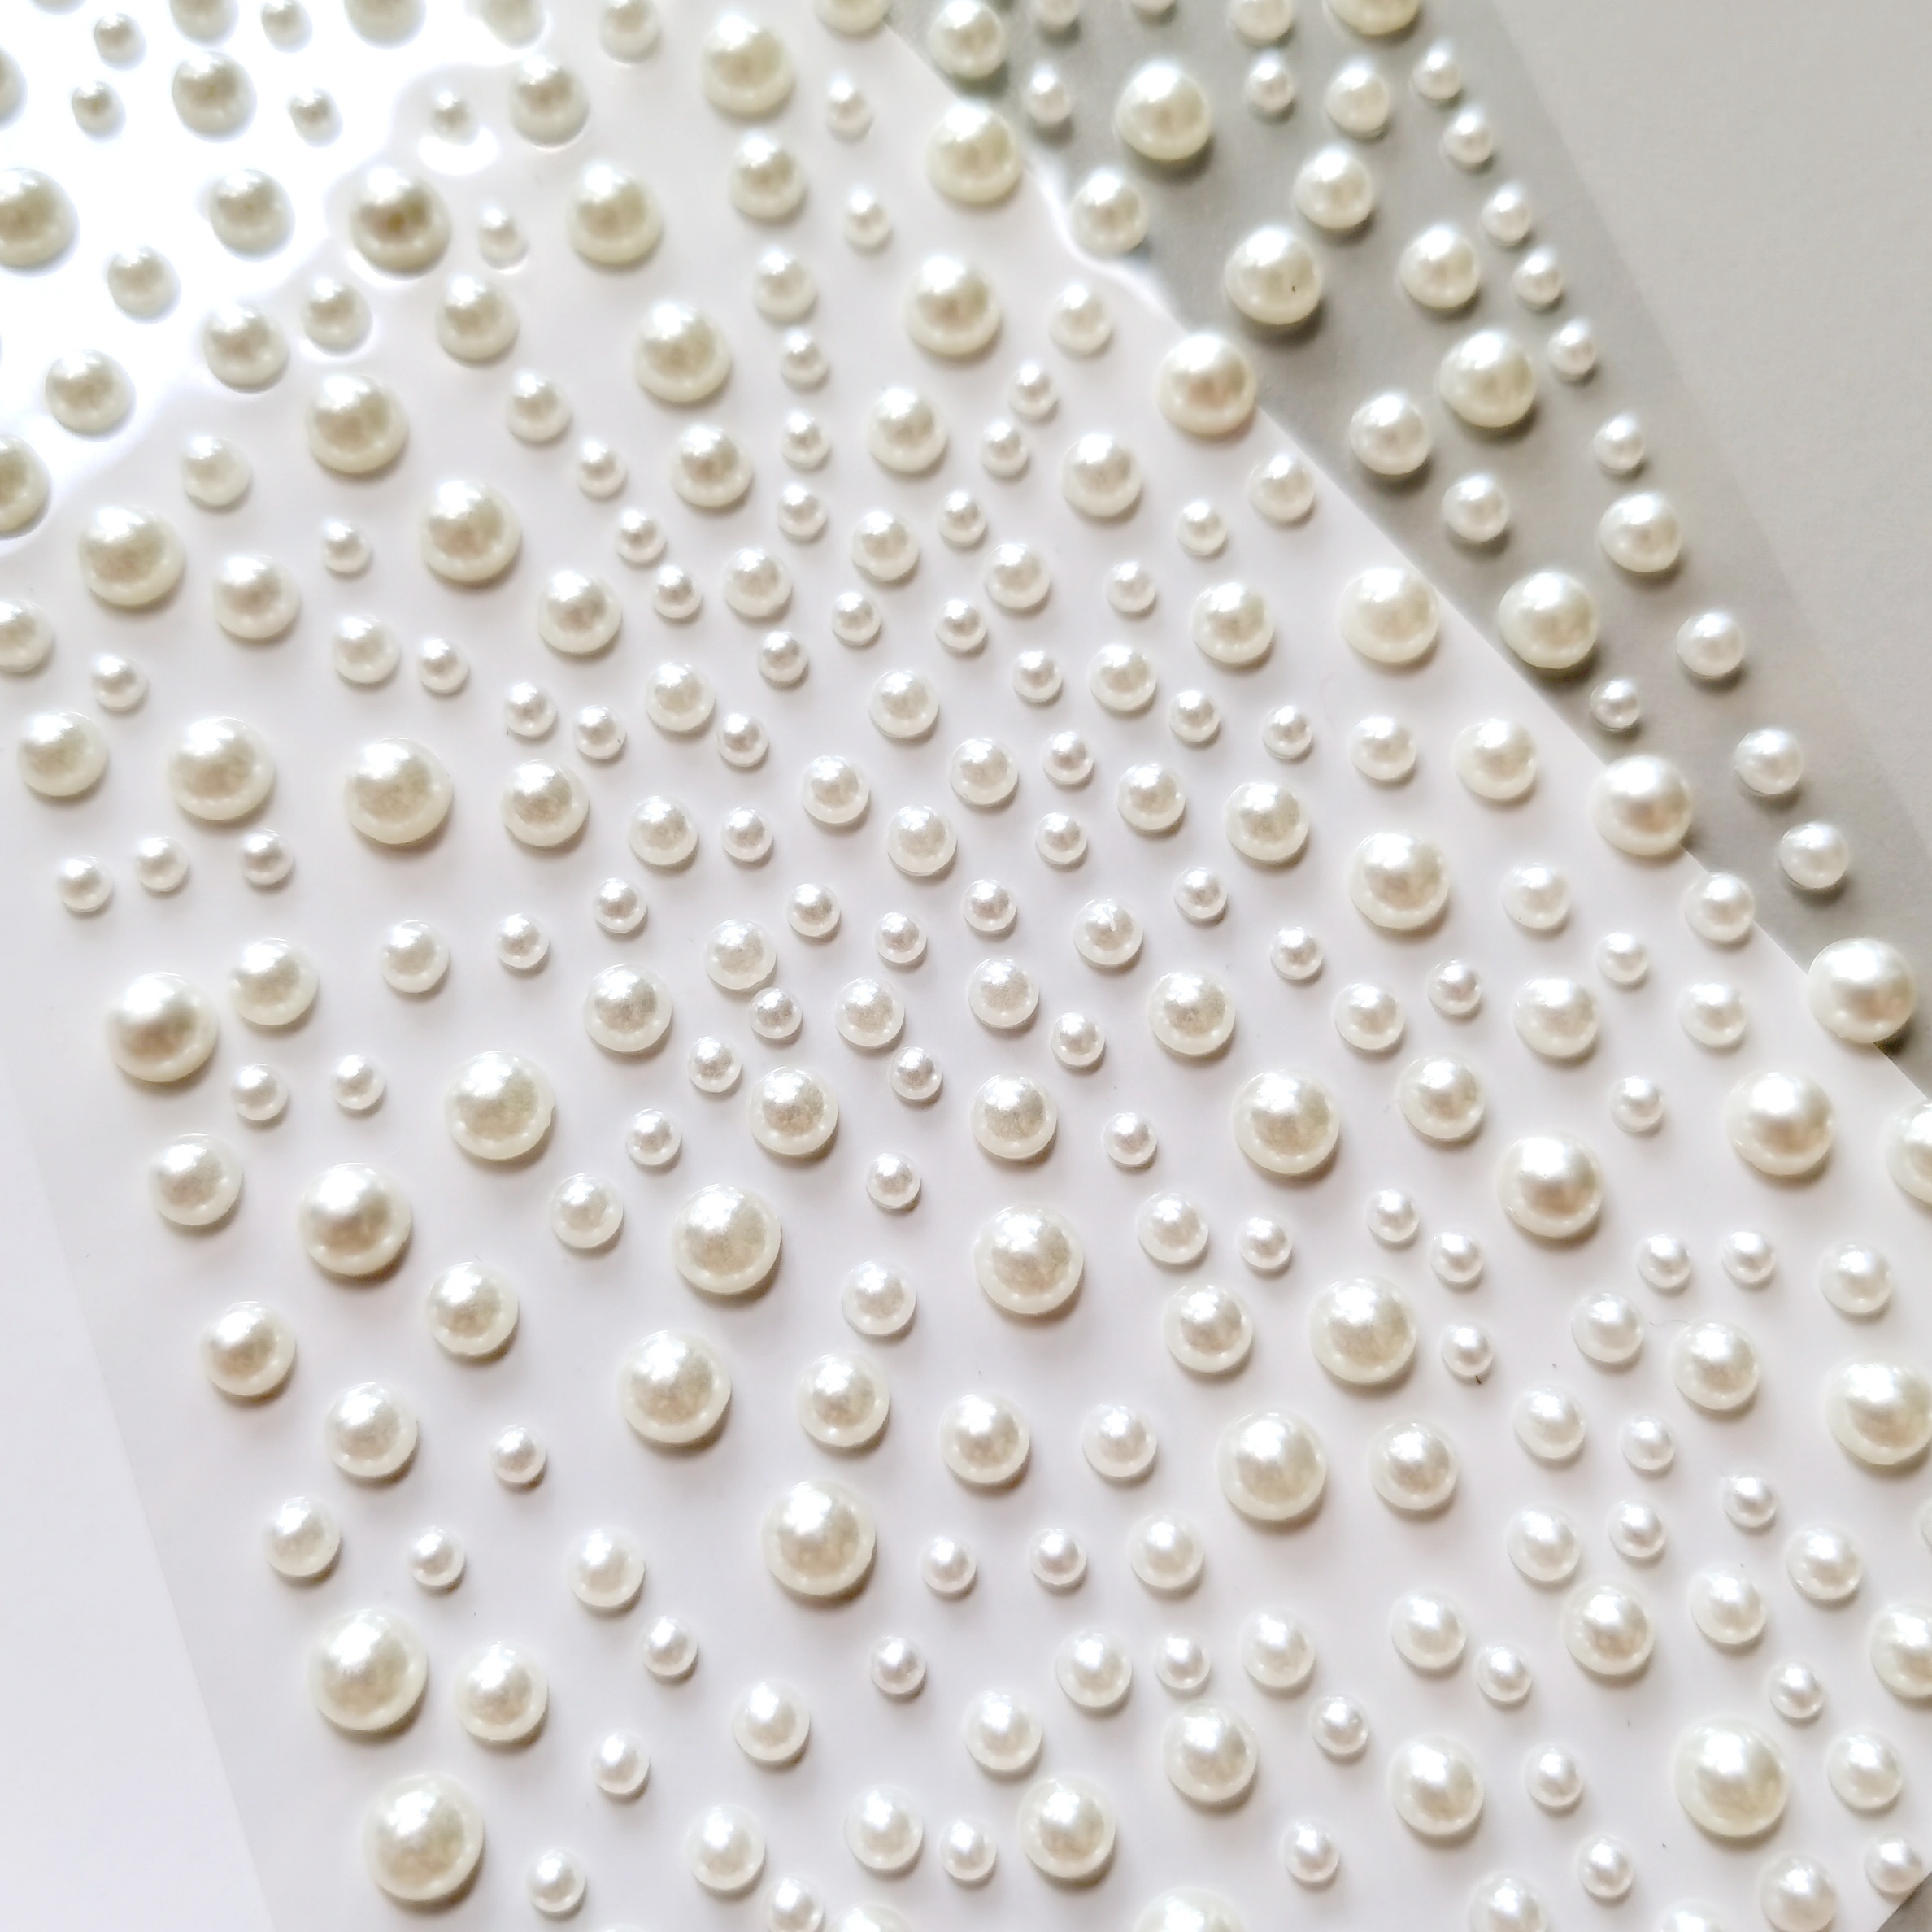 4 Sheets of Pearl Stickers Self-Adhesive Craft Pearls Faux Pearl  Embellishment Makeup Decals 